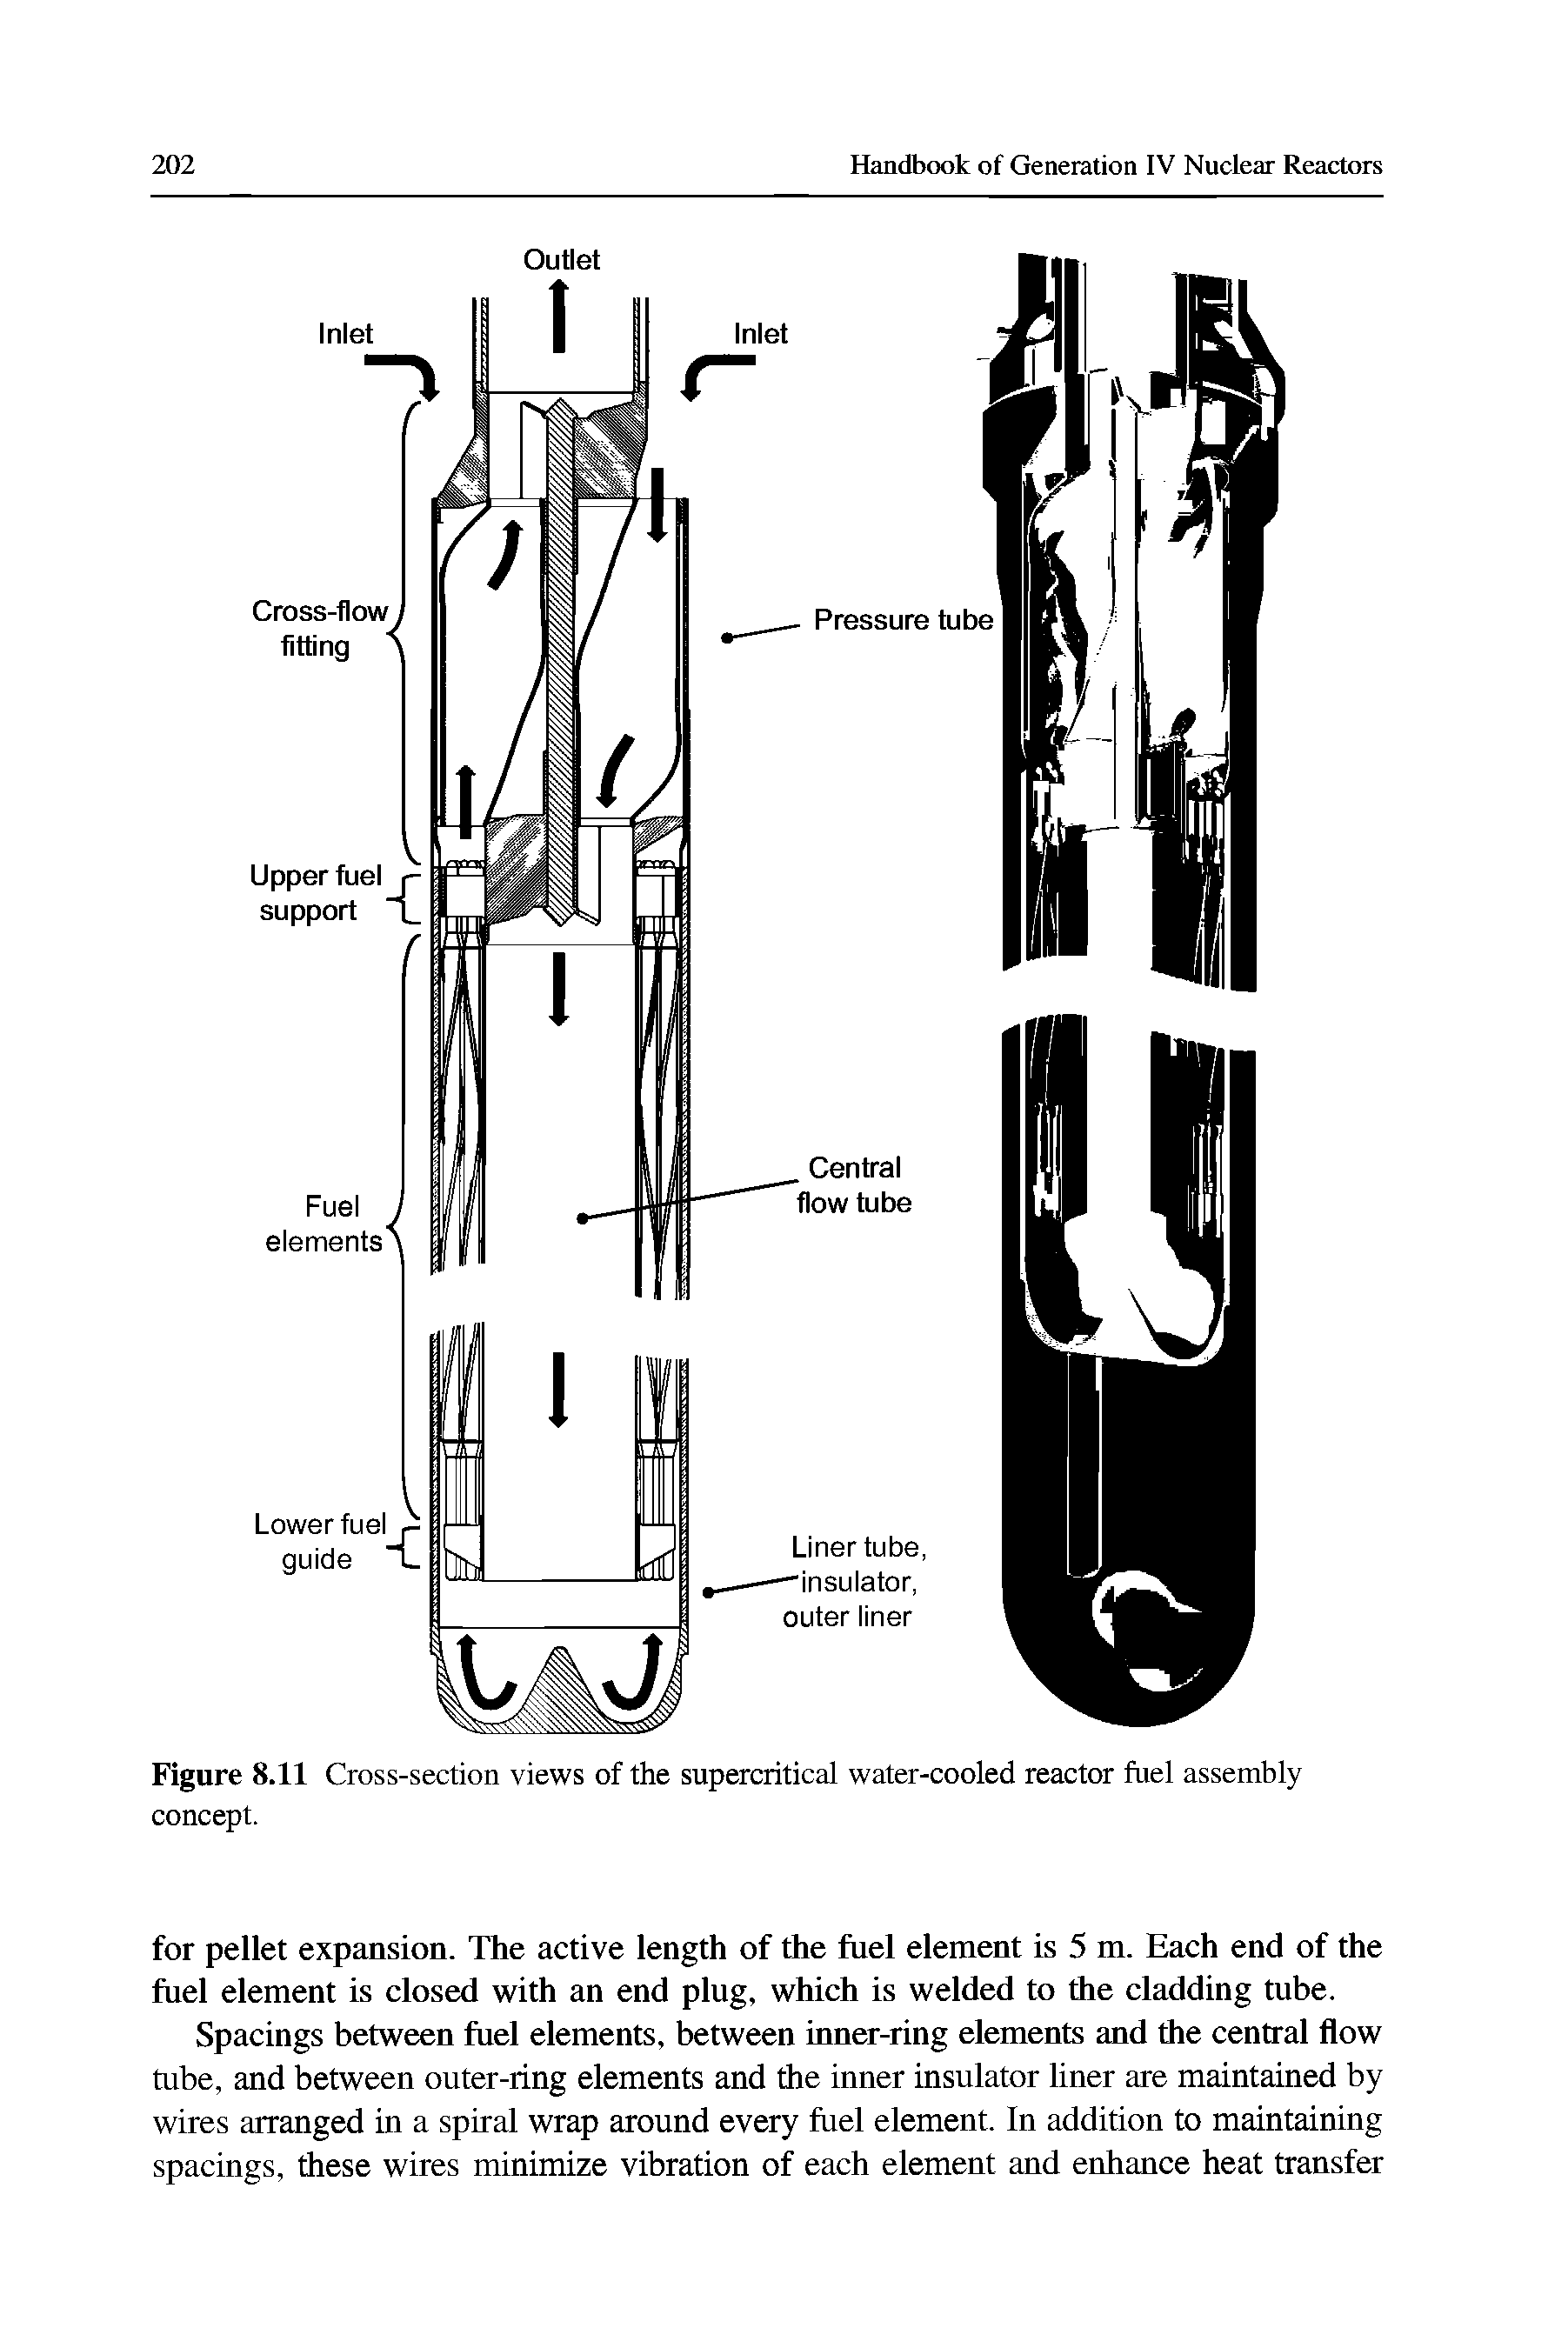 Figure 8.11 Cross-section views of the supercritical water-cooled reactor fuel assembly concept.